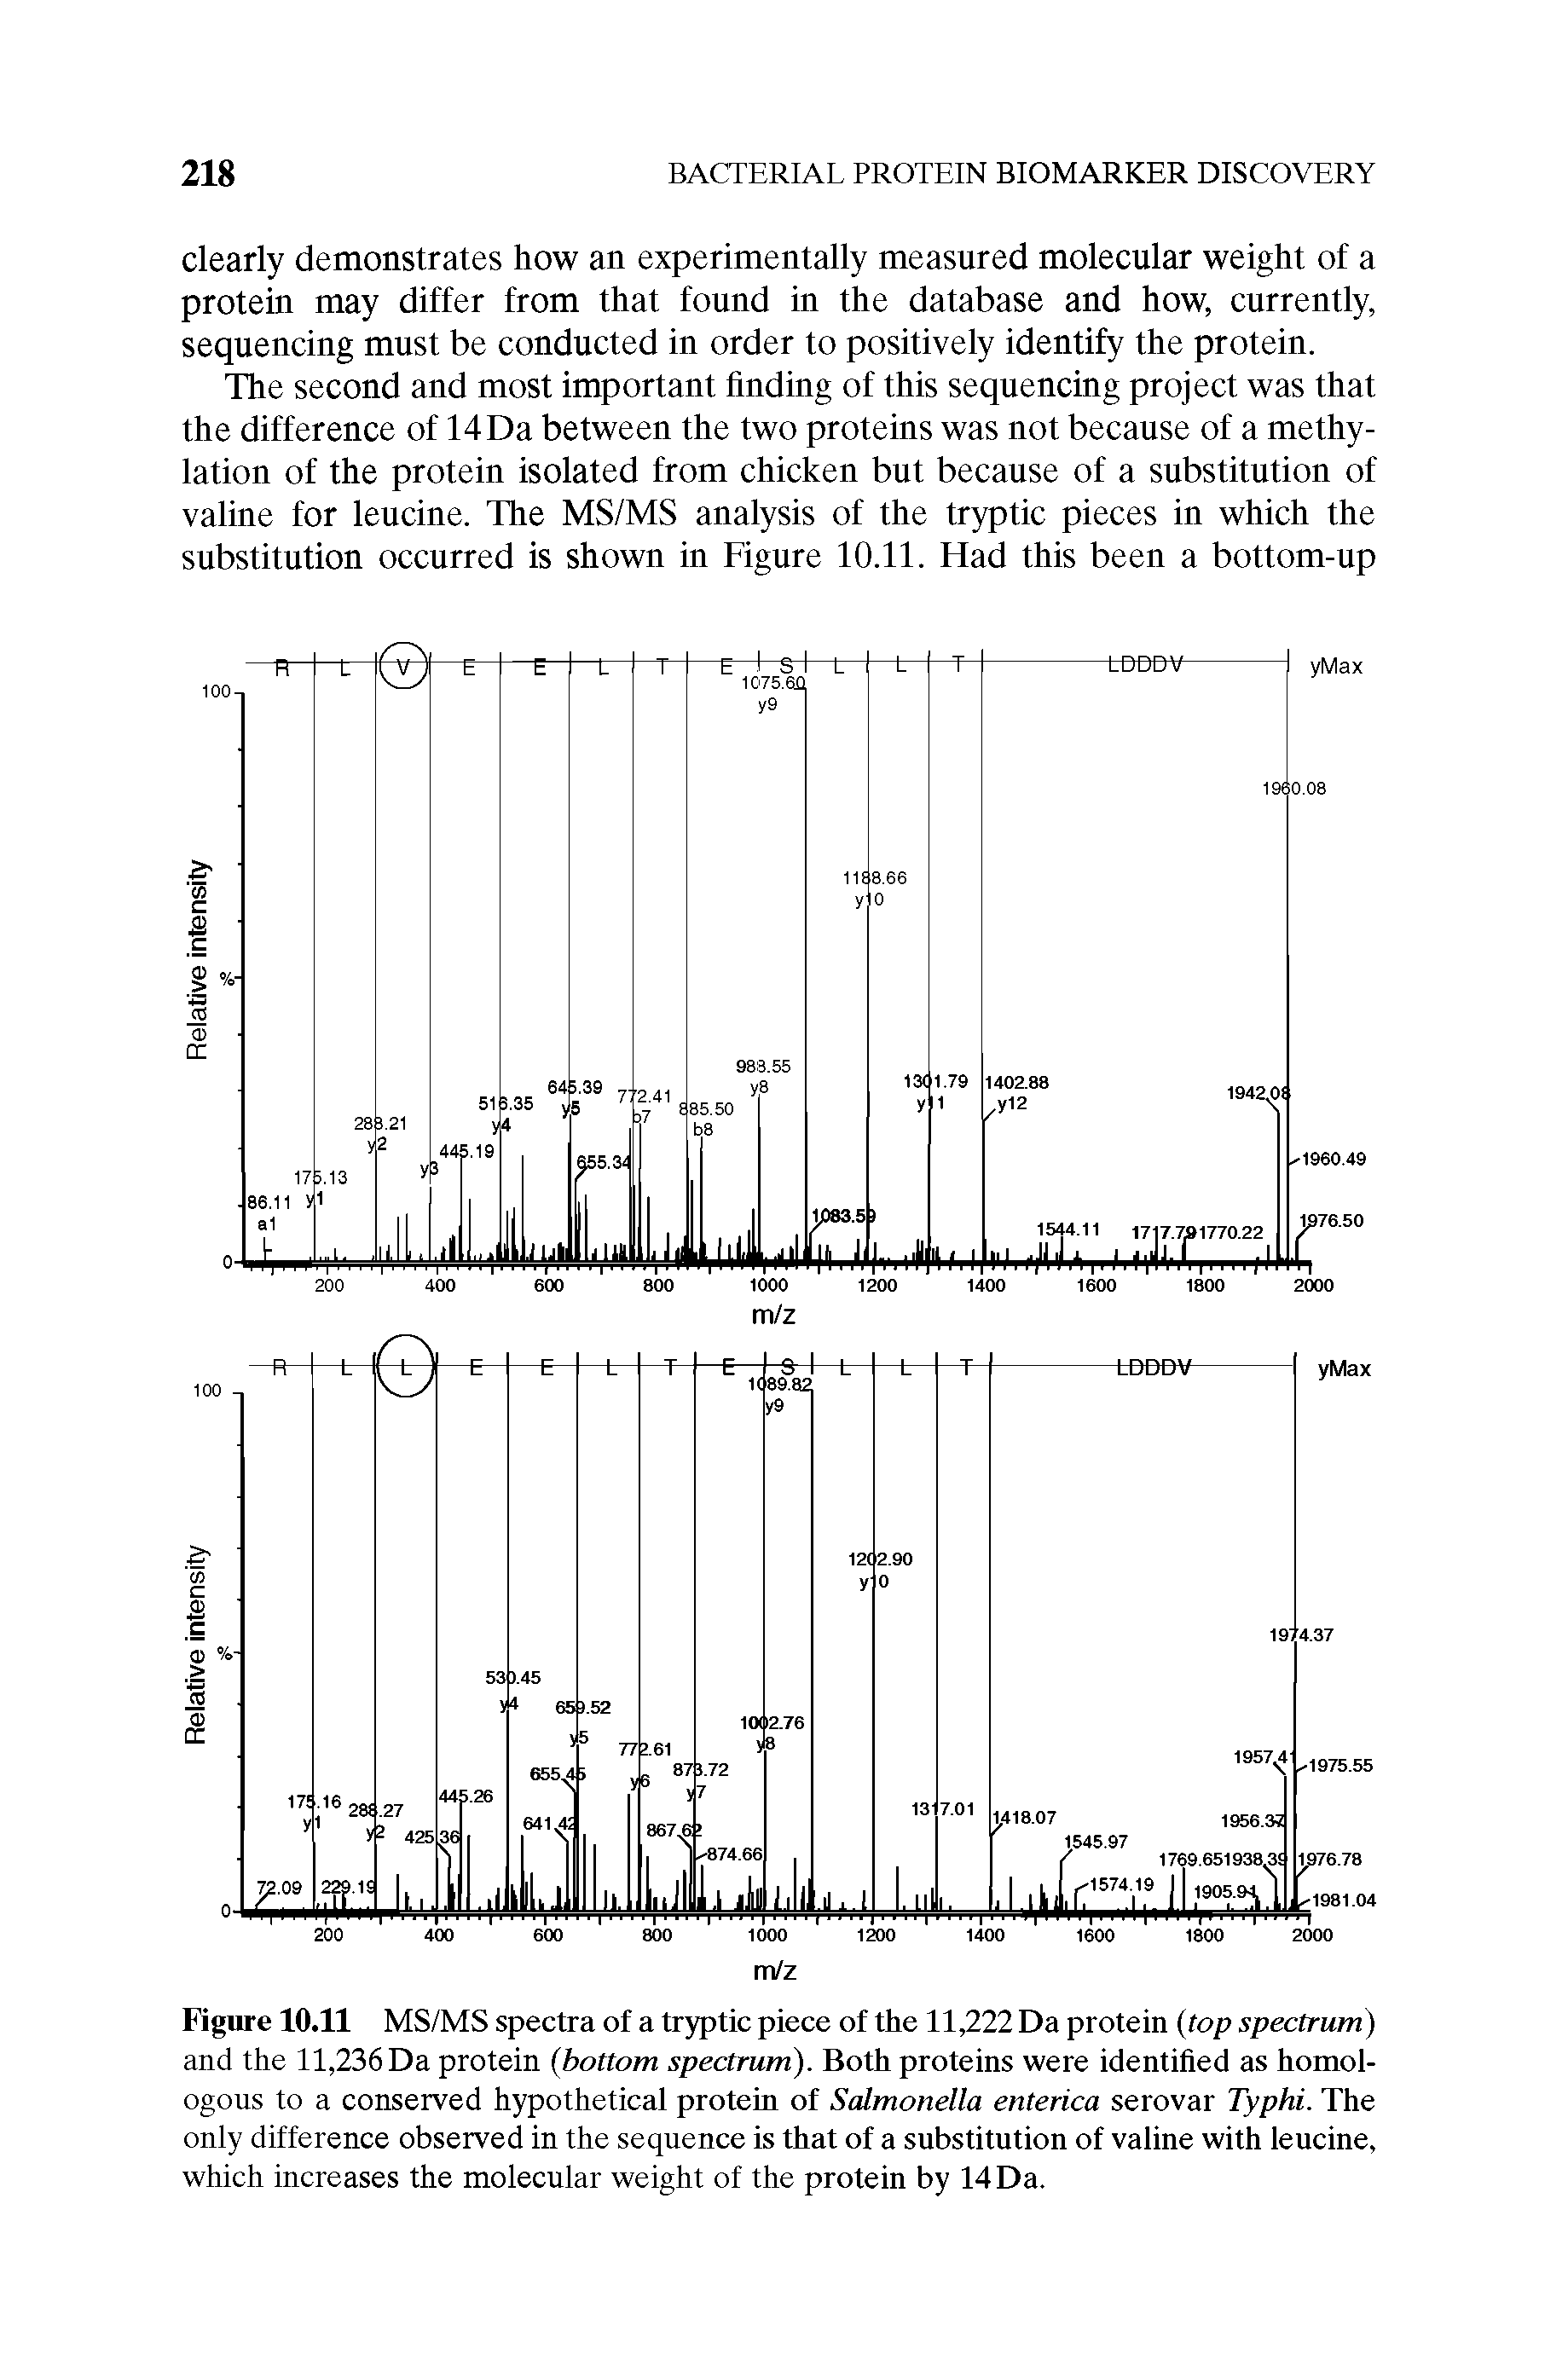 Figure 10.11 MS/MS spectra of a tryptic piece of the 11,222 Da protein (top spectrum) and the 11,236 Da protein (bottom spectrum). Both proteins were identified as homologous to a conserved hypothetical protein of Salmonella enterica serovar Typhi. The only difference observed in the sequence is that of a substitution of valine with leucine, which increases the molecular weight of the protein by 14 Da.